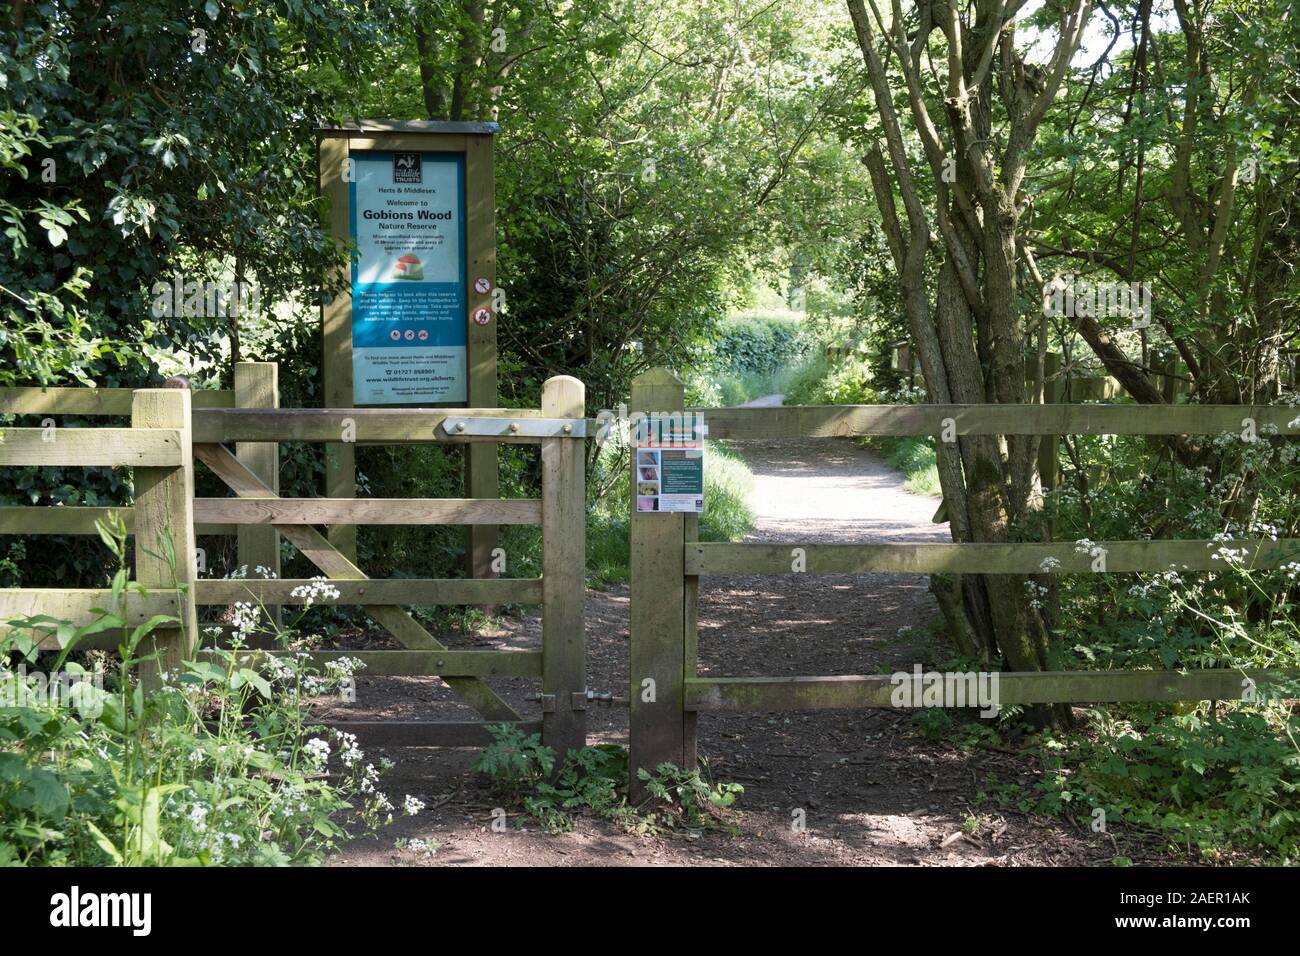 Gobions Wood welcome sign and entrance gateway. Stock Photo